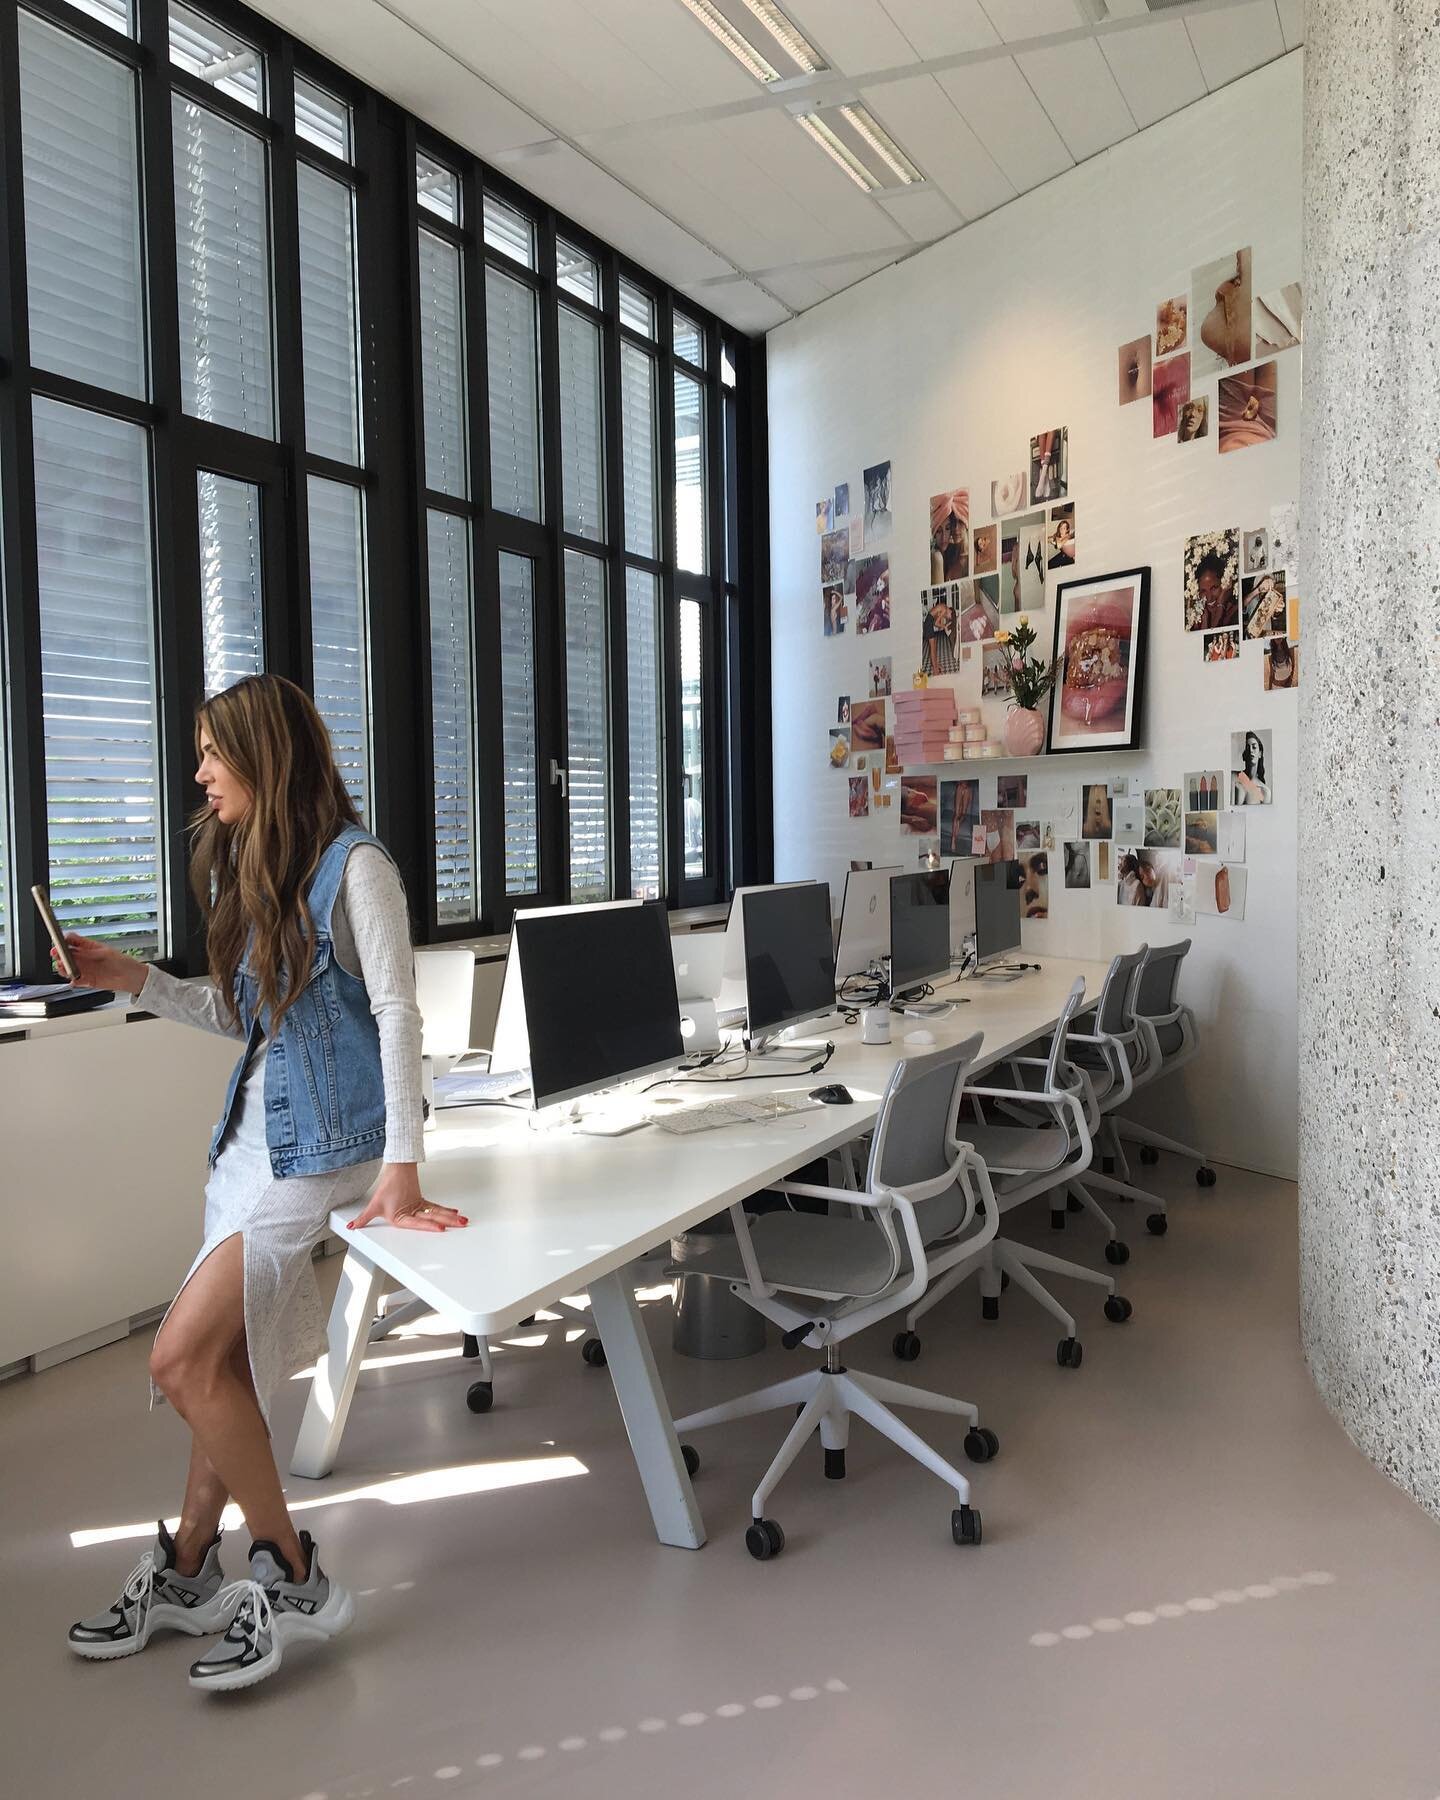 In the office of&hellip; Gisou. 

We are starting a section where we will show some inspirational offices from inspirational companies. First one is Gisou by Negin Mirsalehi, a beauty brand born out of a passion for honey bees and haircare.

Gisou of